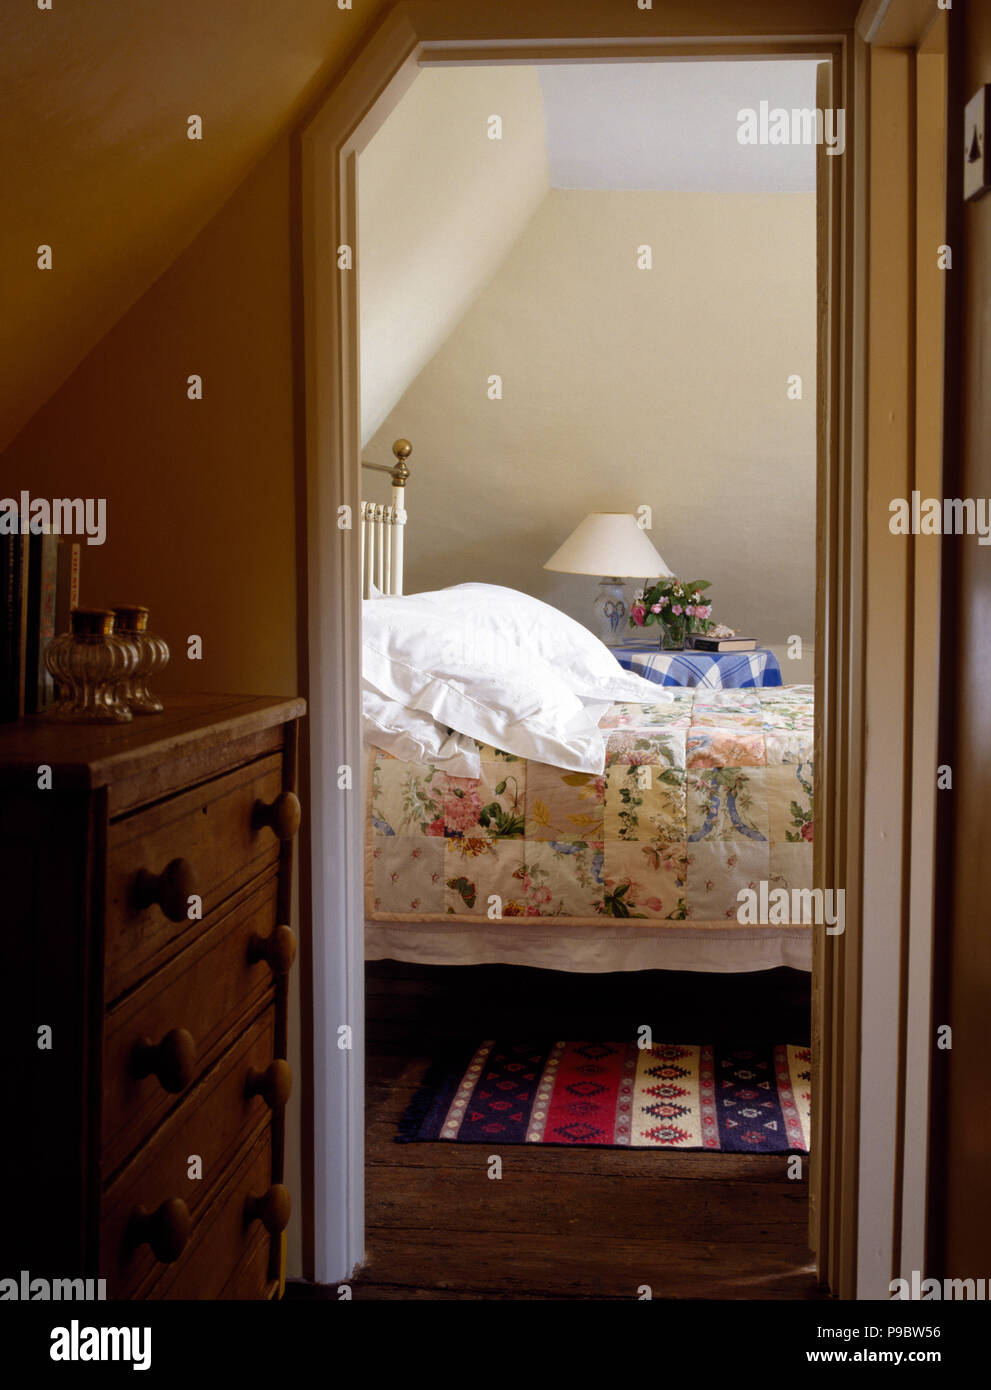 Door open to a cottage bedroom with a floral patchwork quilt on the bed Stock Photo